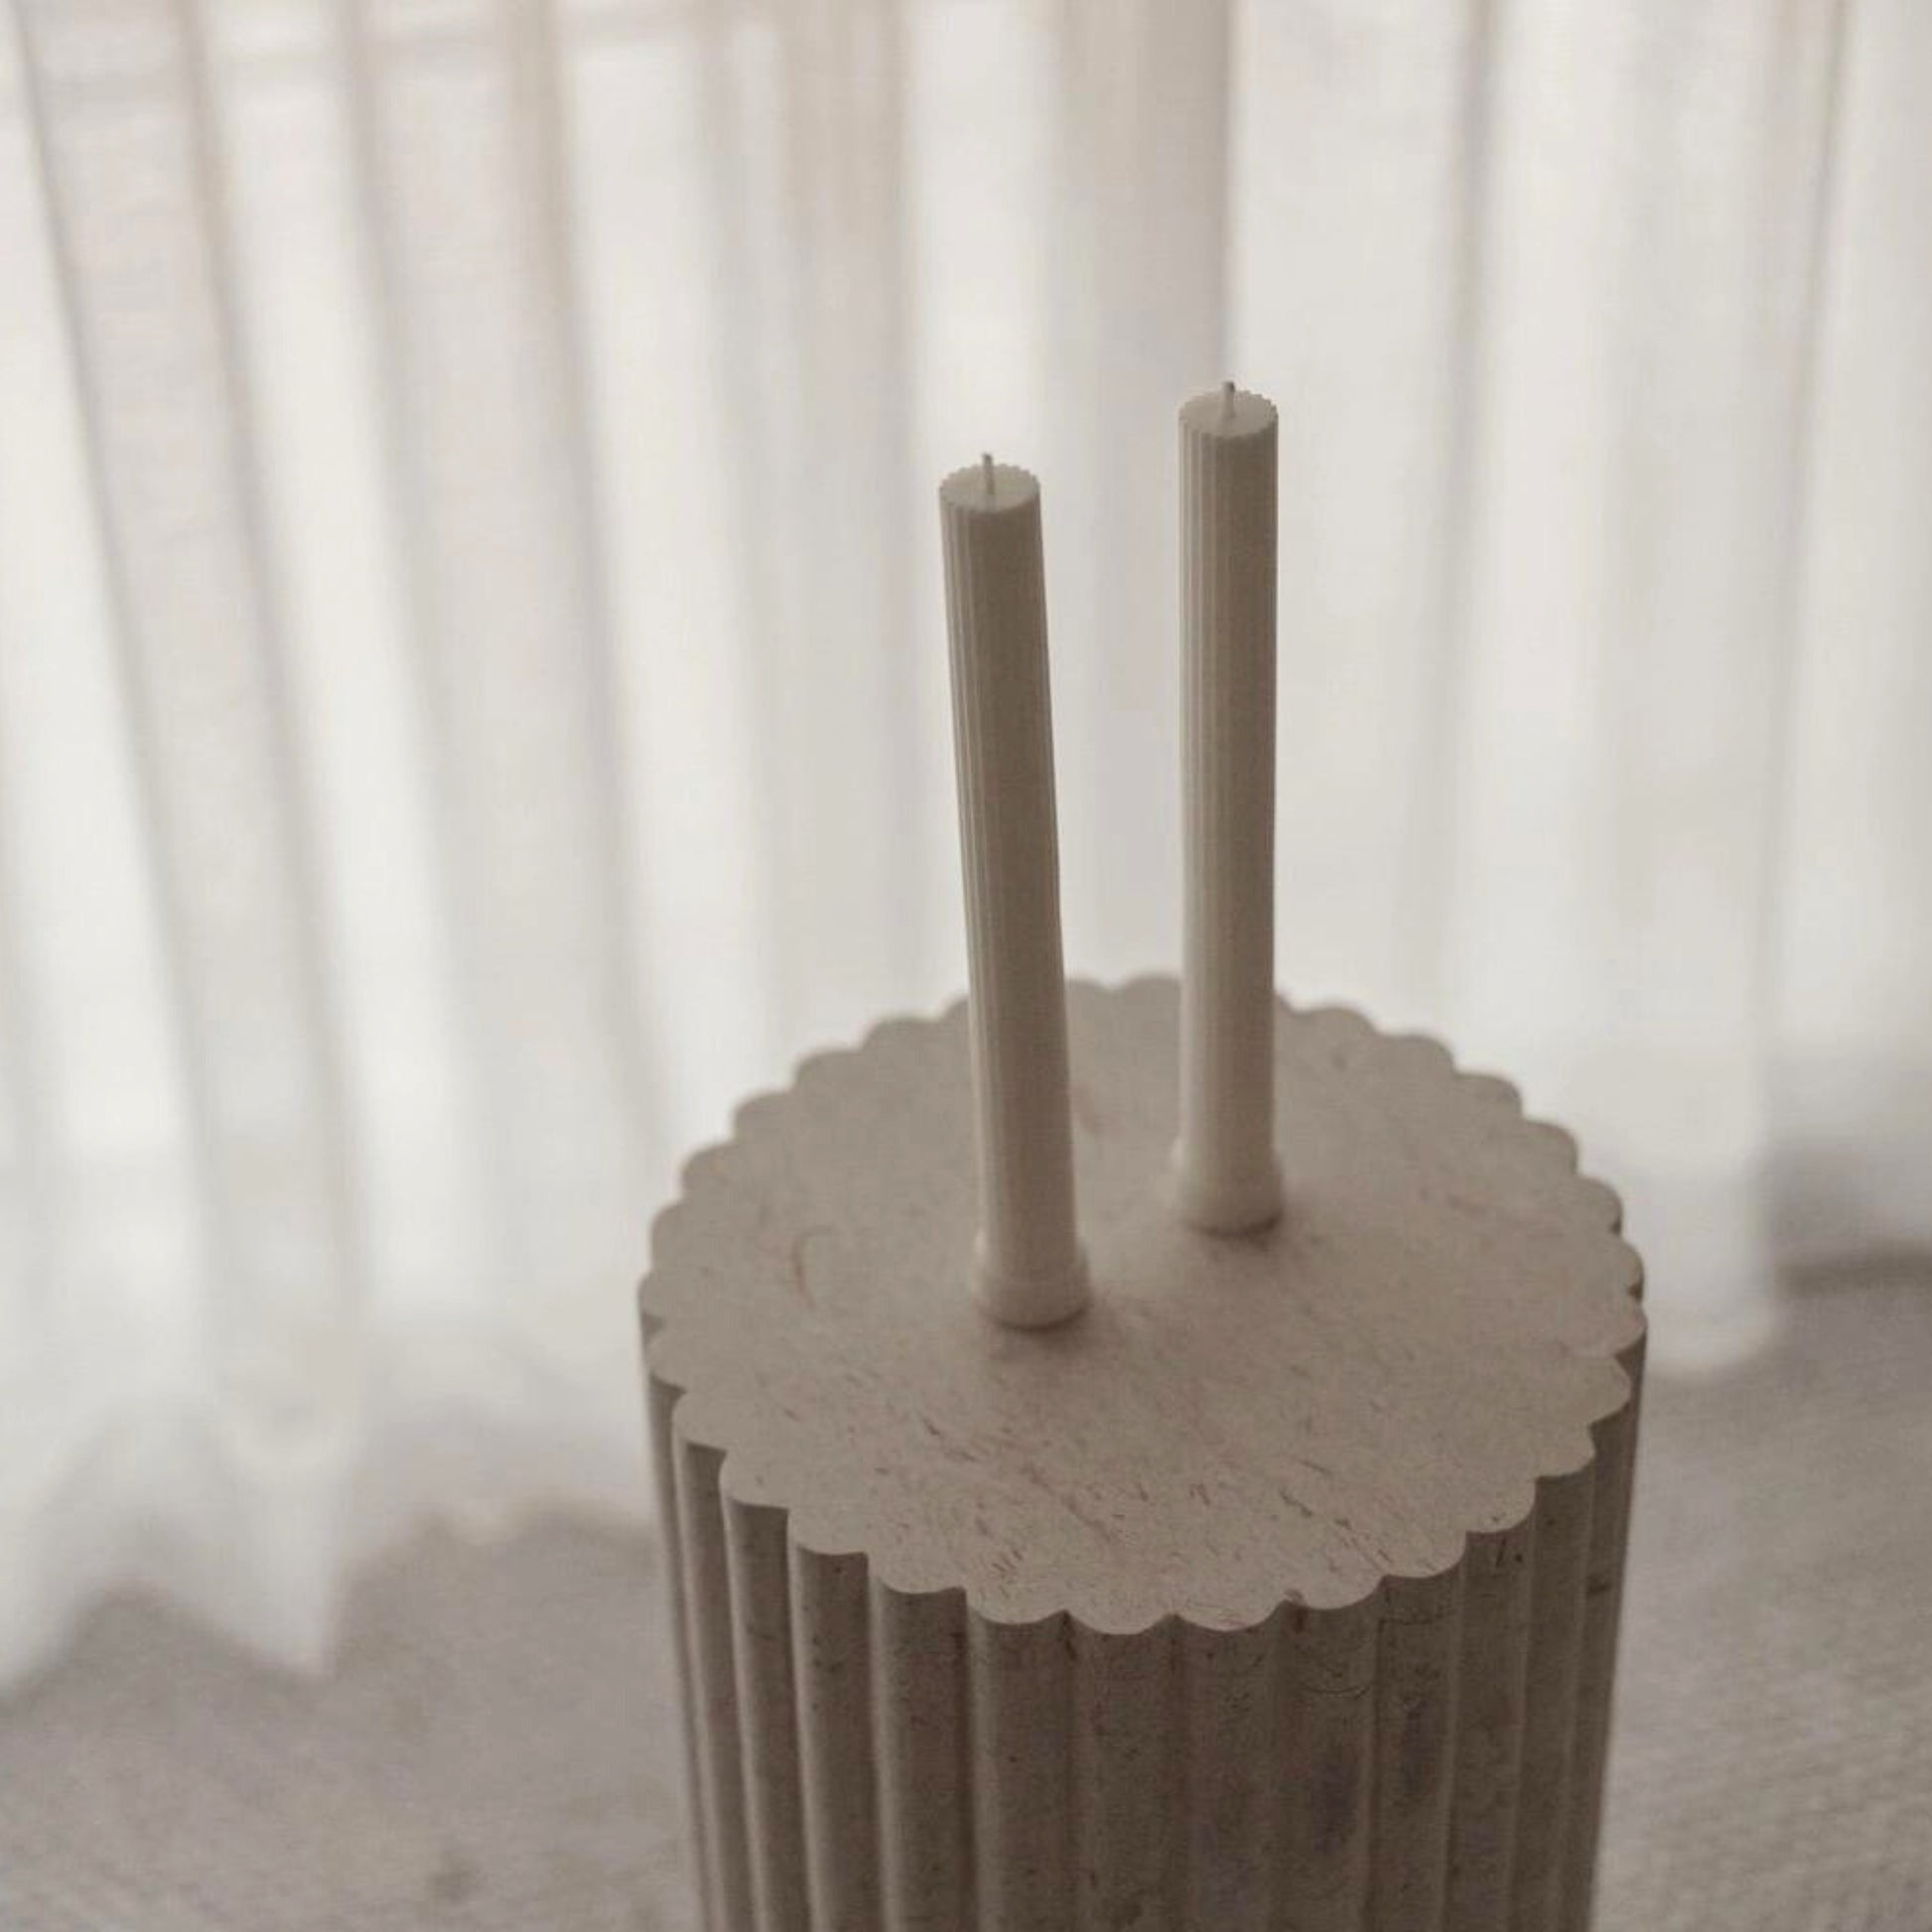 Pillar candles displayed on stone stand